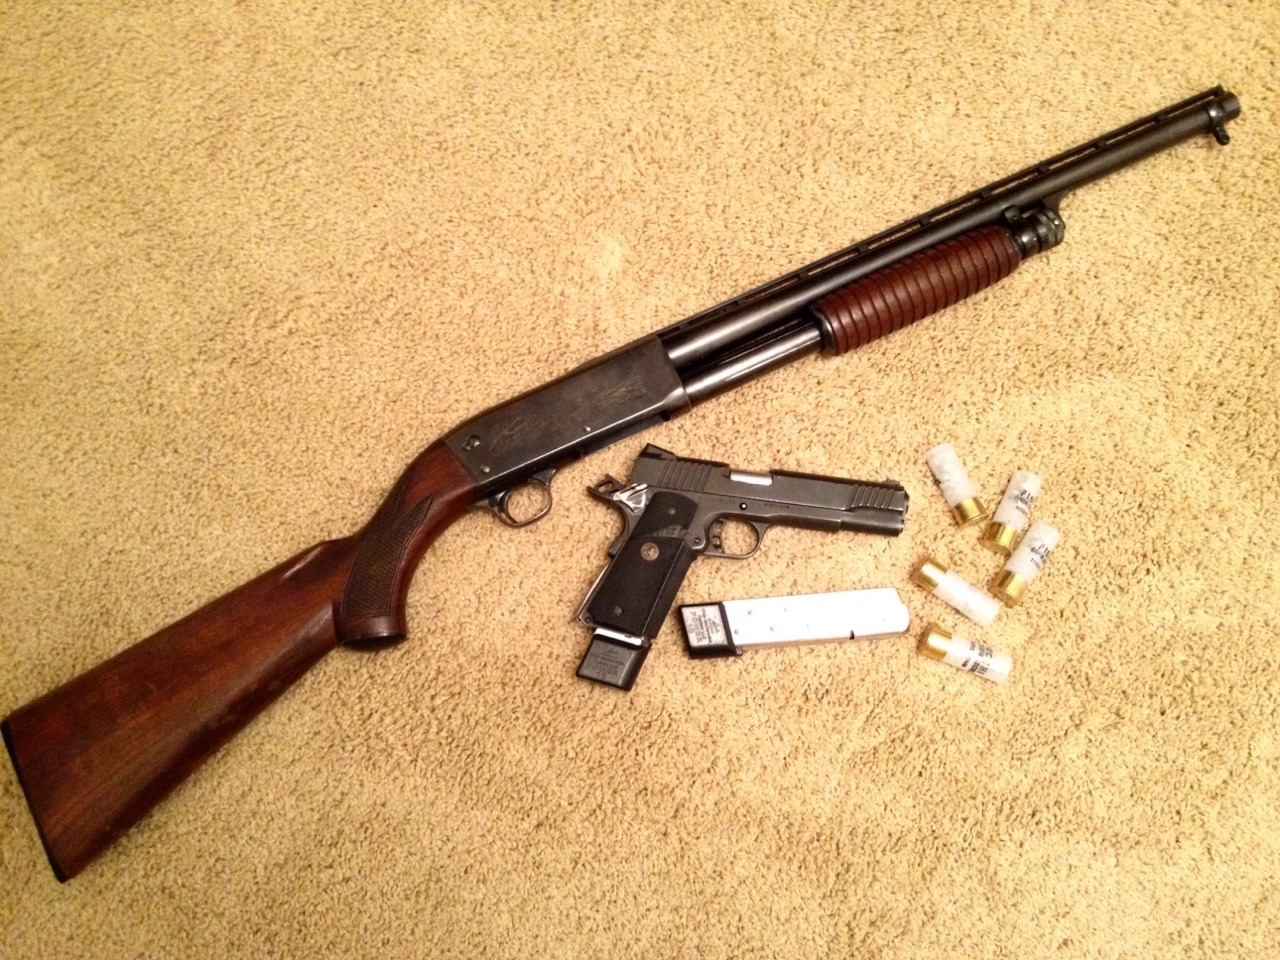 thatonegunblog:  It would be foolhardy to attempt a home invasion tonight.